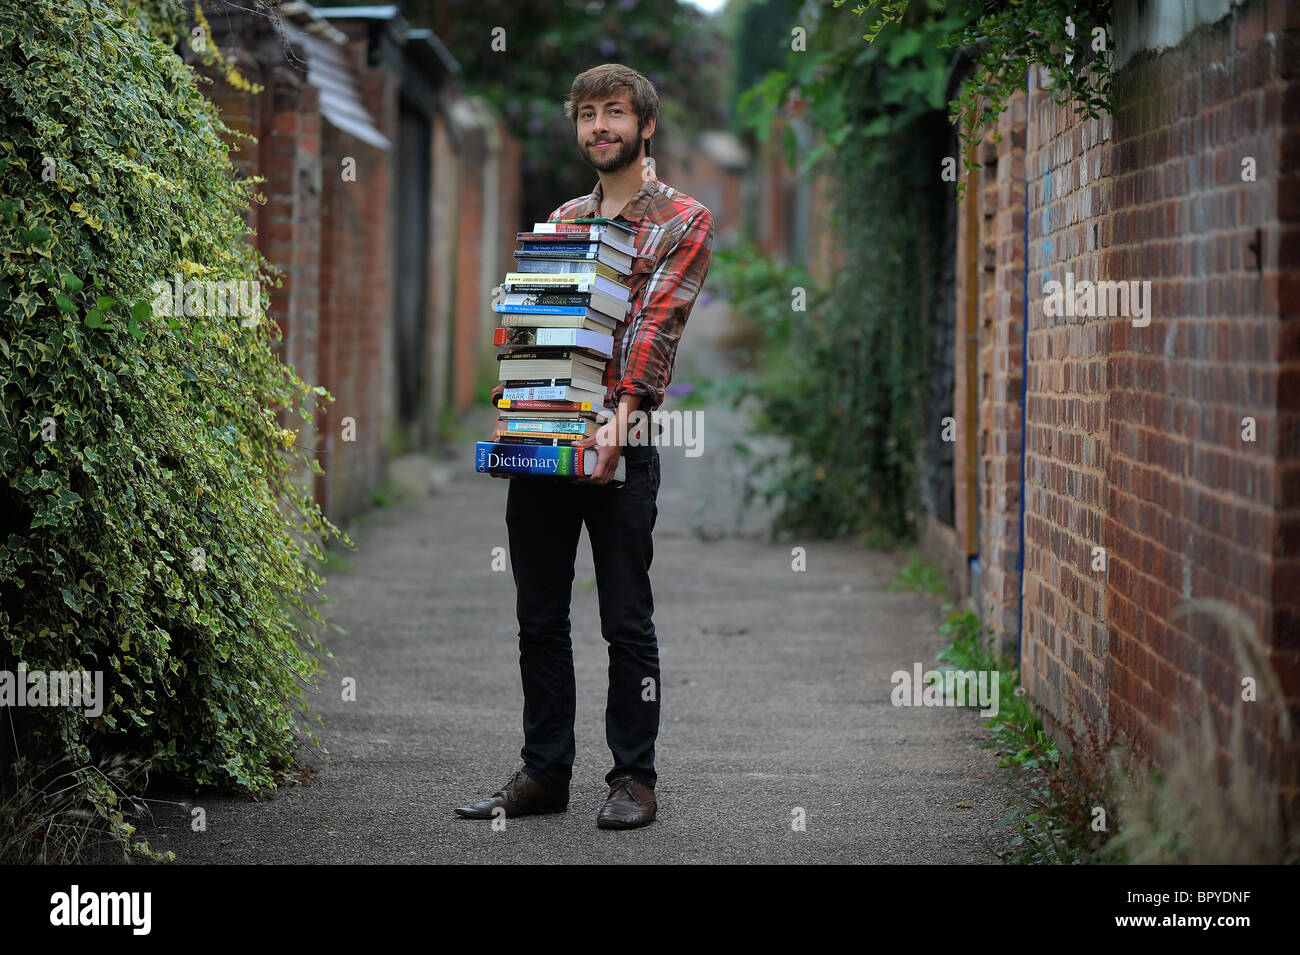 A student standing with a large pile of books, illustrating studying, revision, cramming and revising Stock Photo